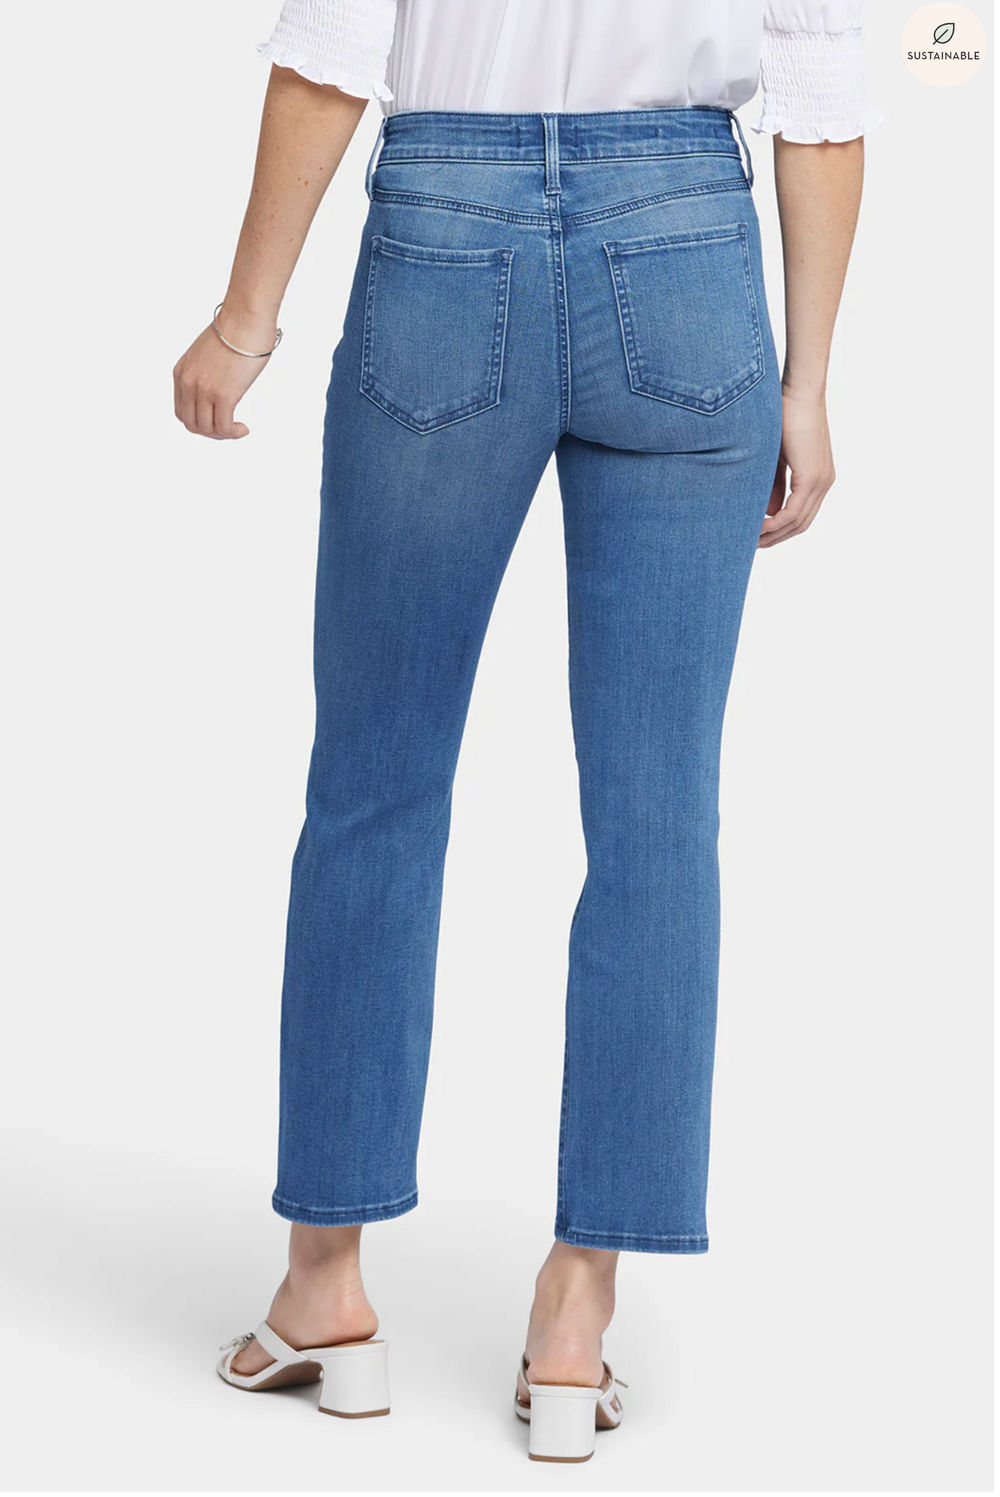 NYDJ Marilyn straight jeans (mid-rise, zip) ankle blue island